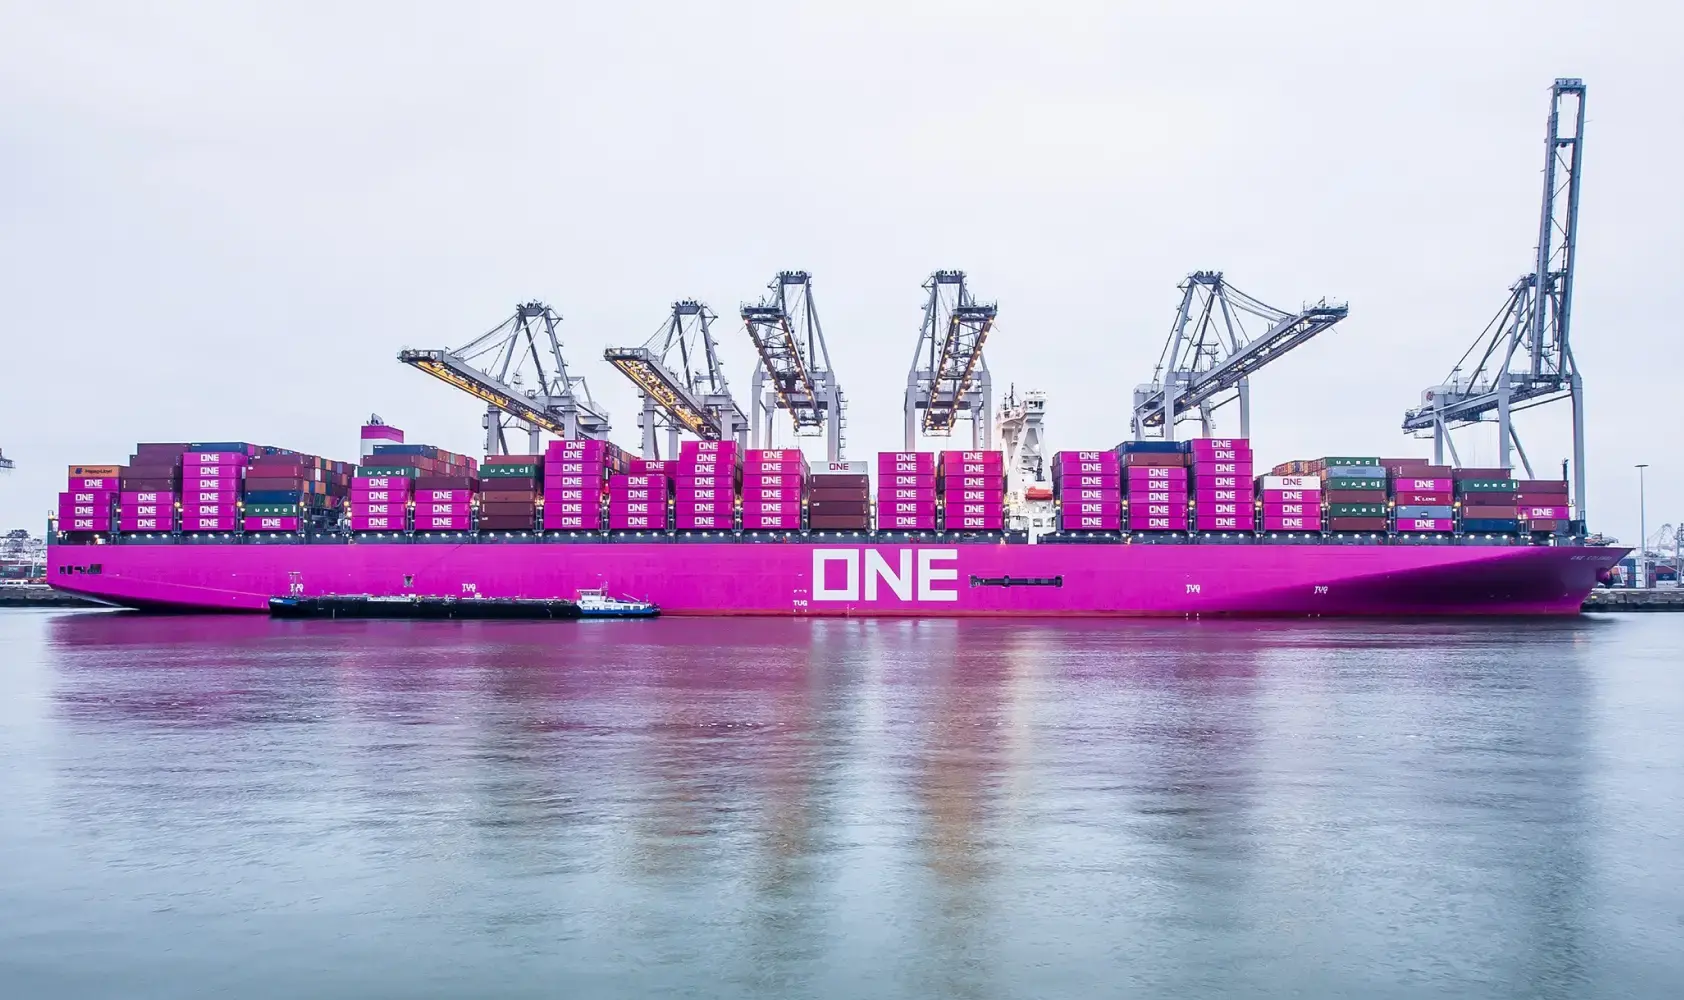 ONE and Portchain ink deal to drive sustainability across the carrier's network through the digitalization of berth alignment